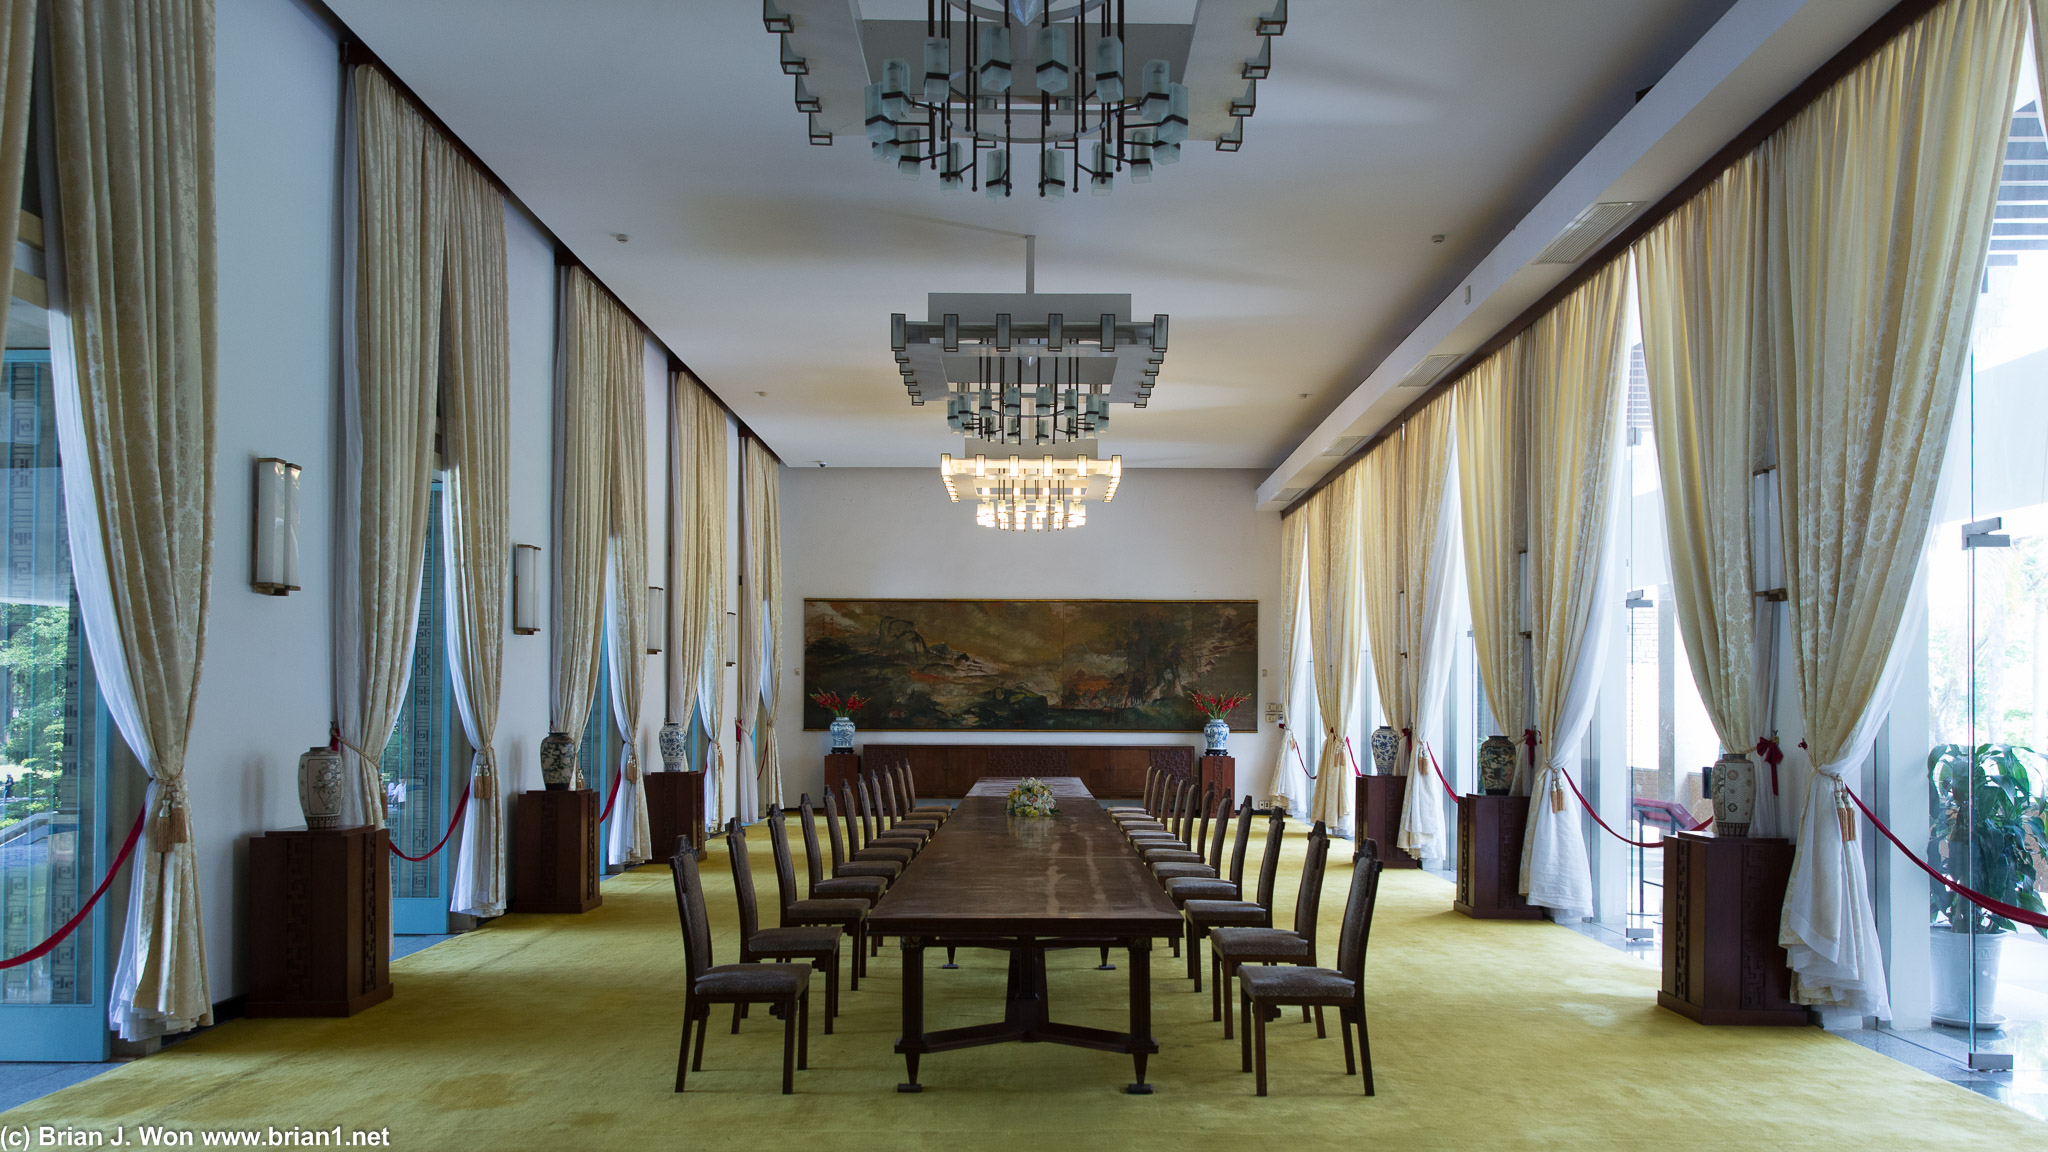 Formal rooms on every floor.